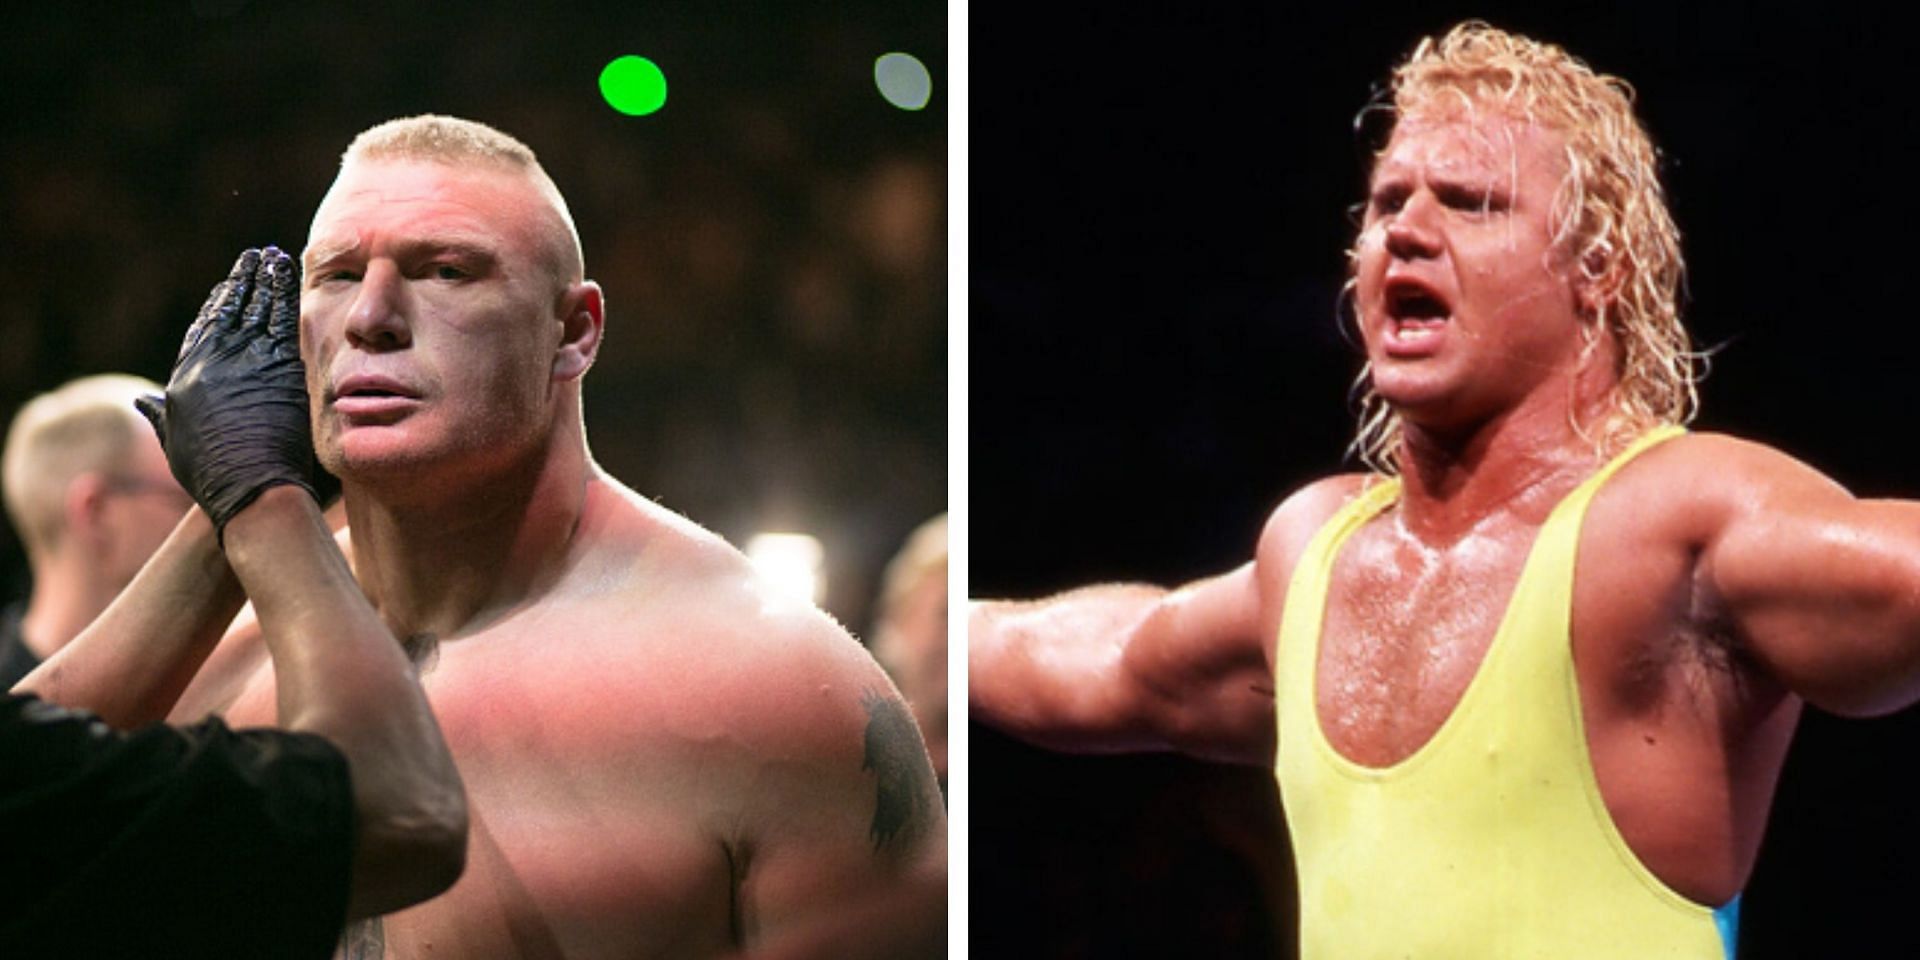 Brock Lesnar and Curt Hennig had an infamous brawl that took place on the &quot;Plane Ride from Hell&quot; in 2002.